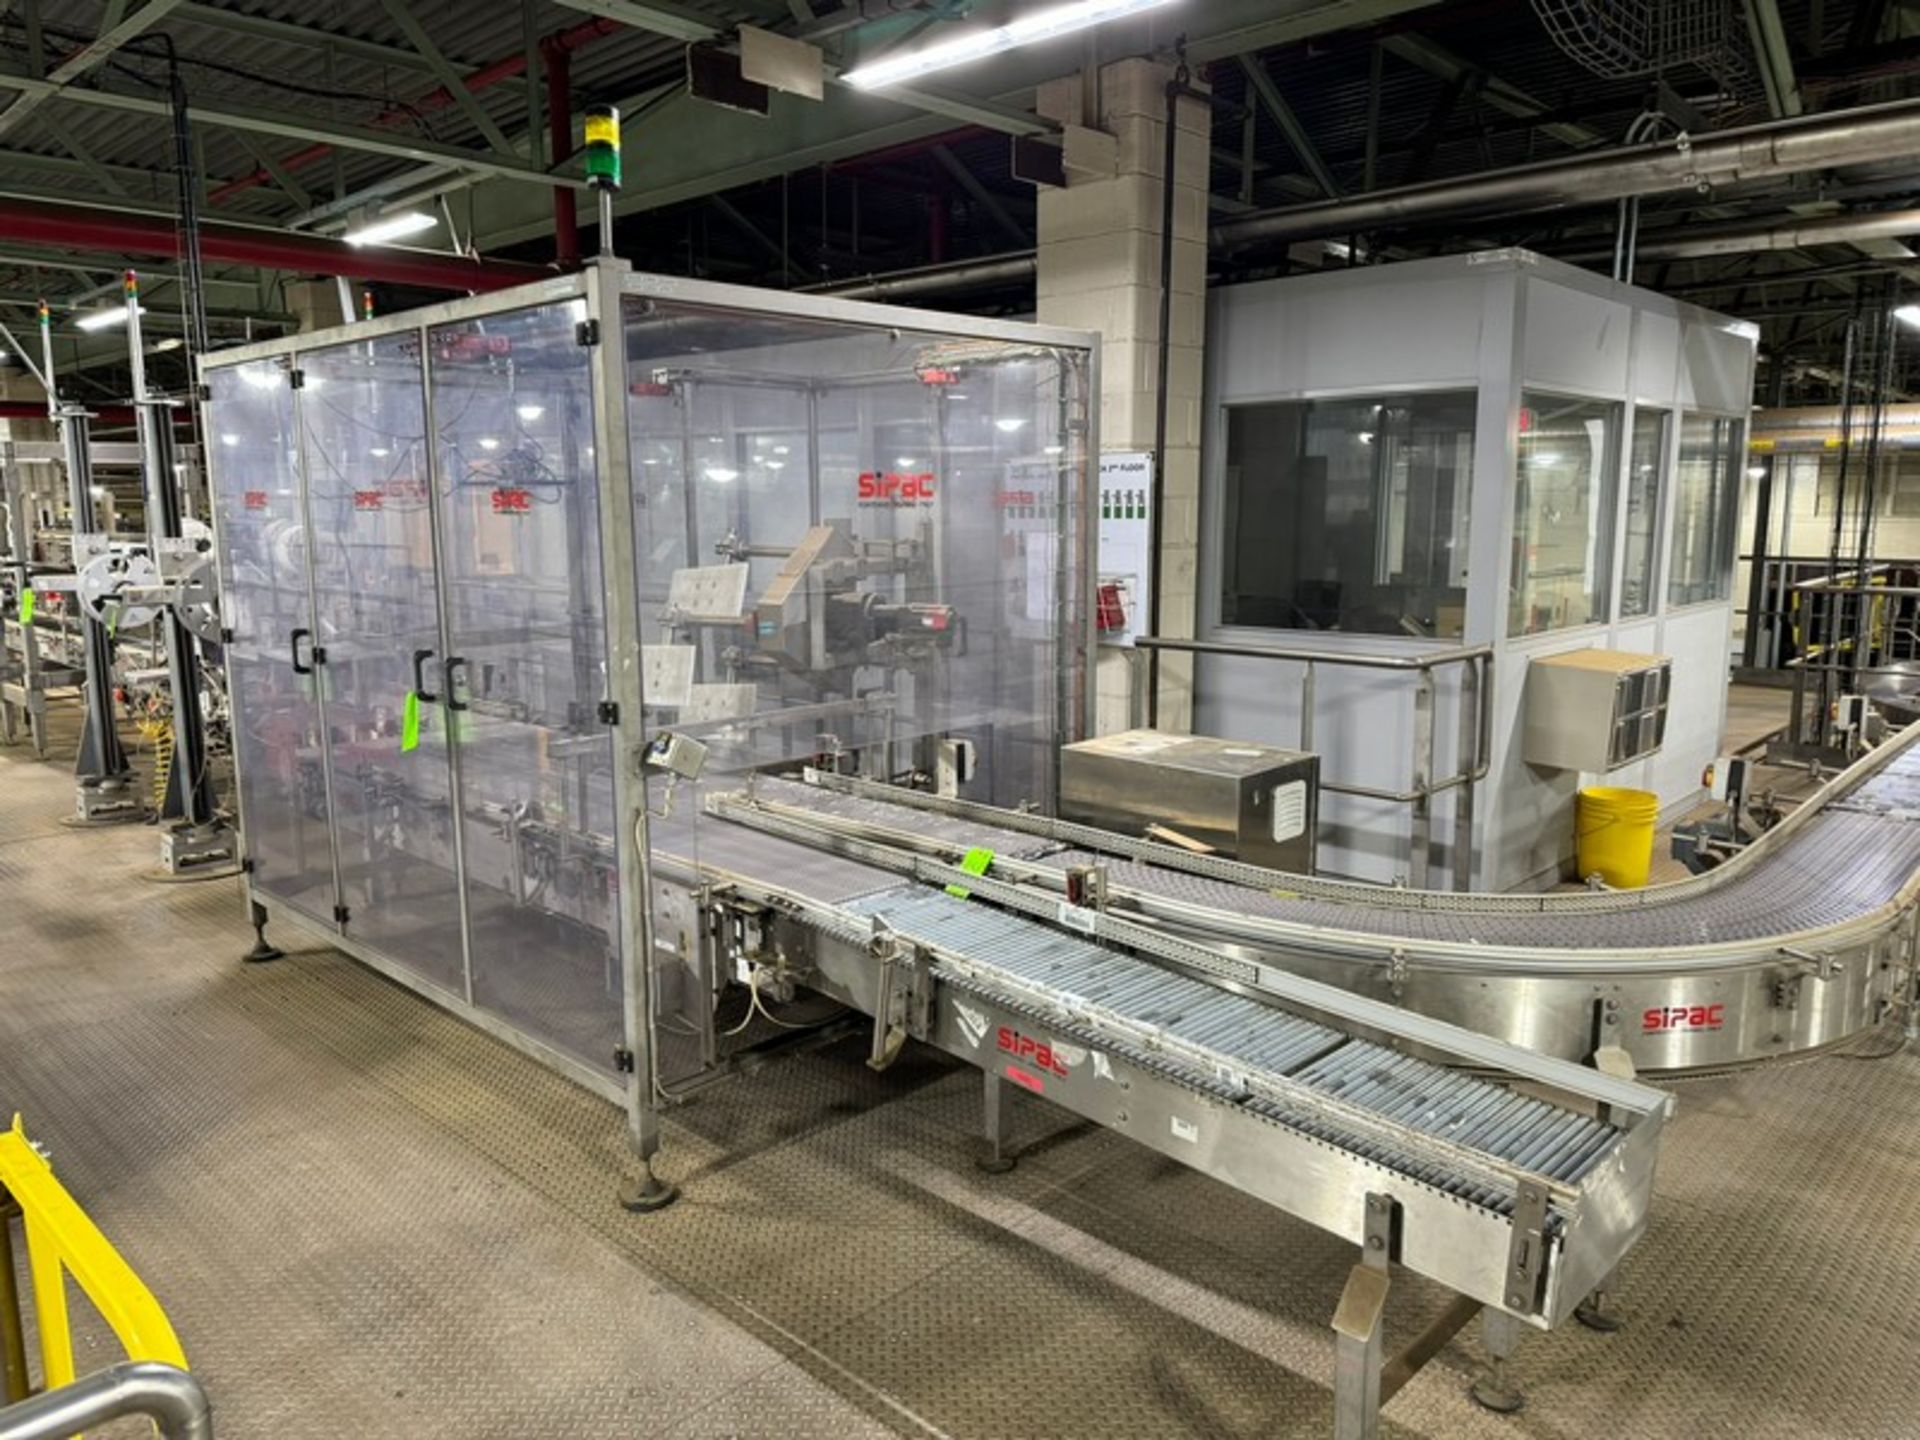 SIPAC Orientor, with Aprox. 36-3/4” W Conveyor Belt, with Enclosure (LOCATED IN FREEHOLD, N.J.) - Bild 2 aus 7